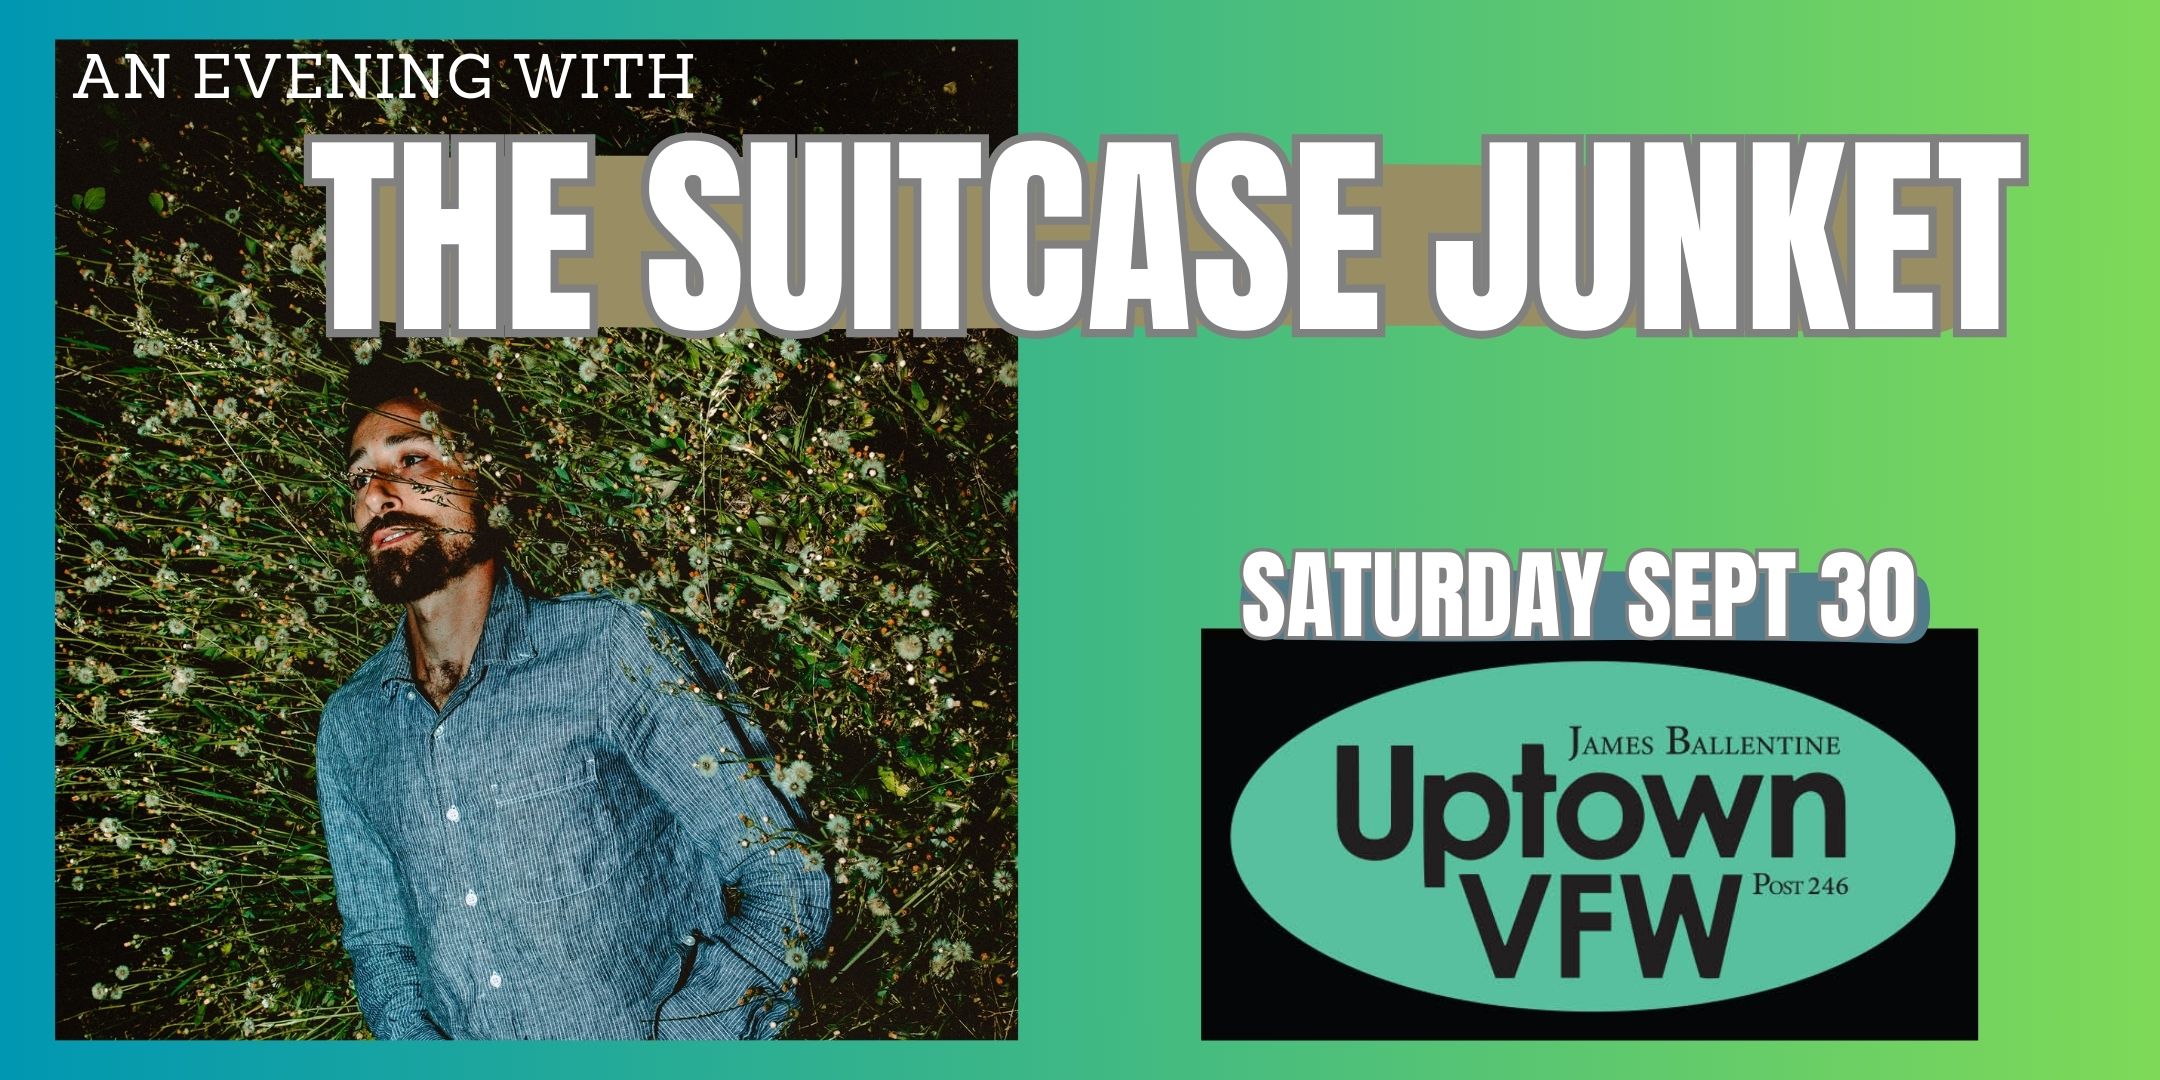 An Evening with The Suitcase Junket Saturday September 30 James Ballentine "Uptown" VFW Post 246 Doors 6:30pm :: Music 7:00pm :: 21+ GA $15 ADV / $20 DOS NO REFUNDS